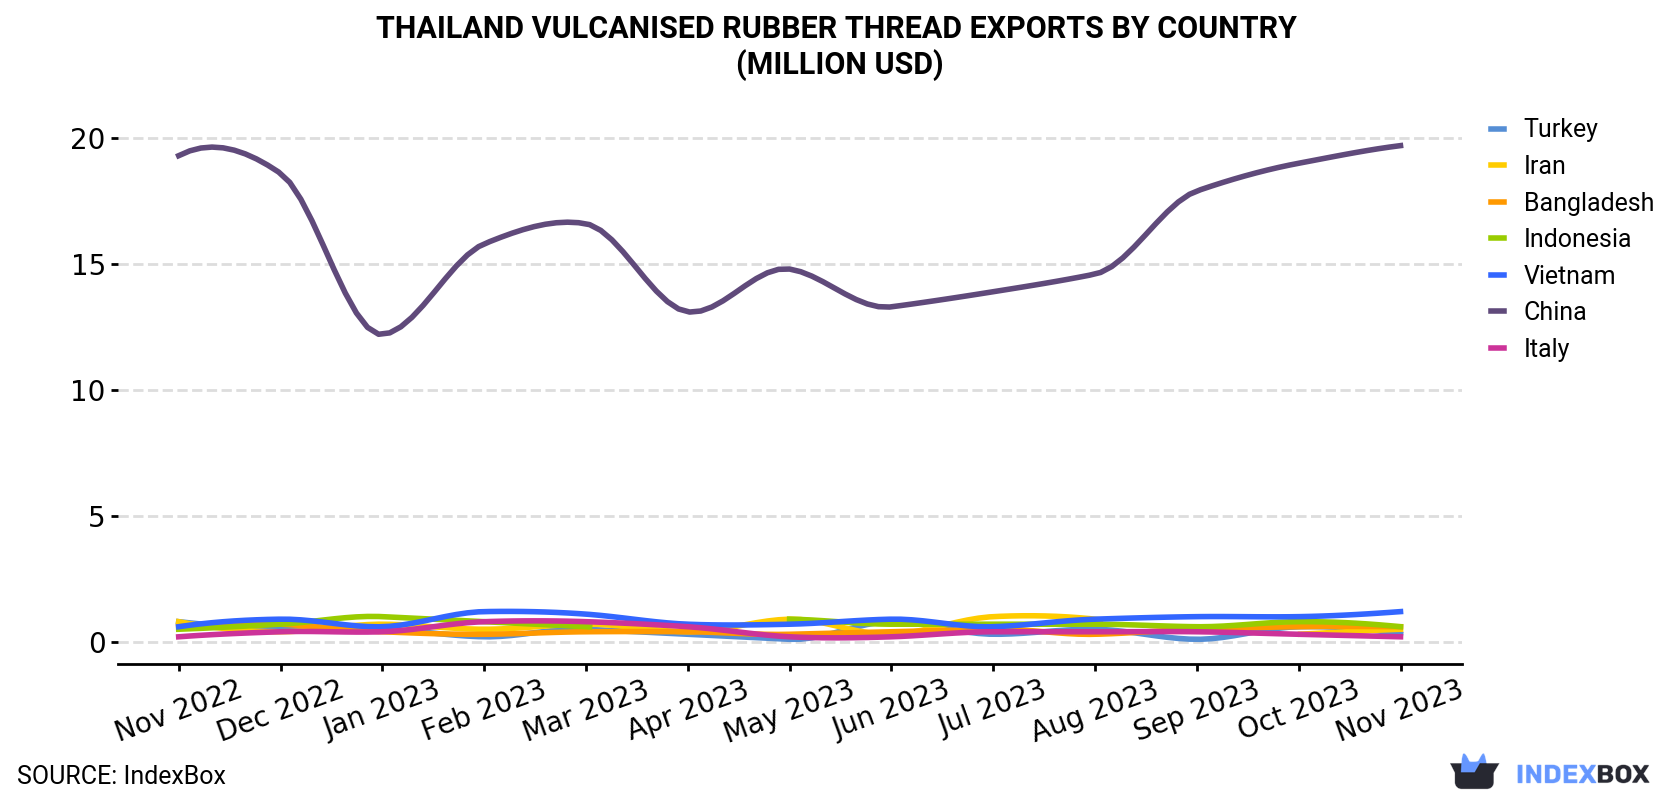 Thailand Vulcanised Rubber Thread Exports By Country (Million USD)